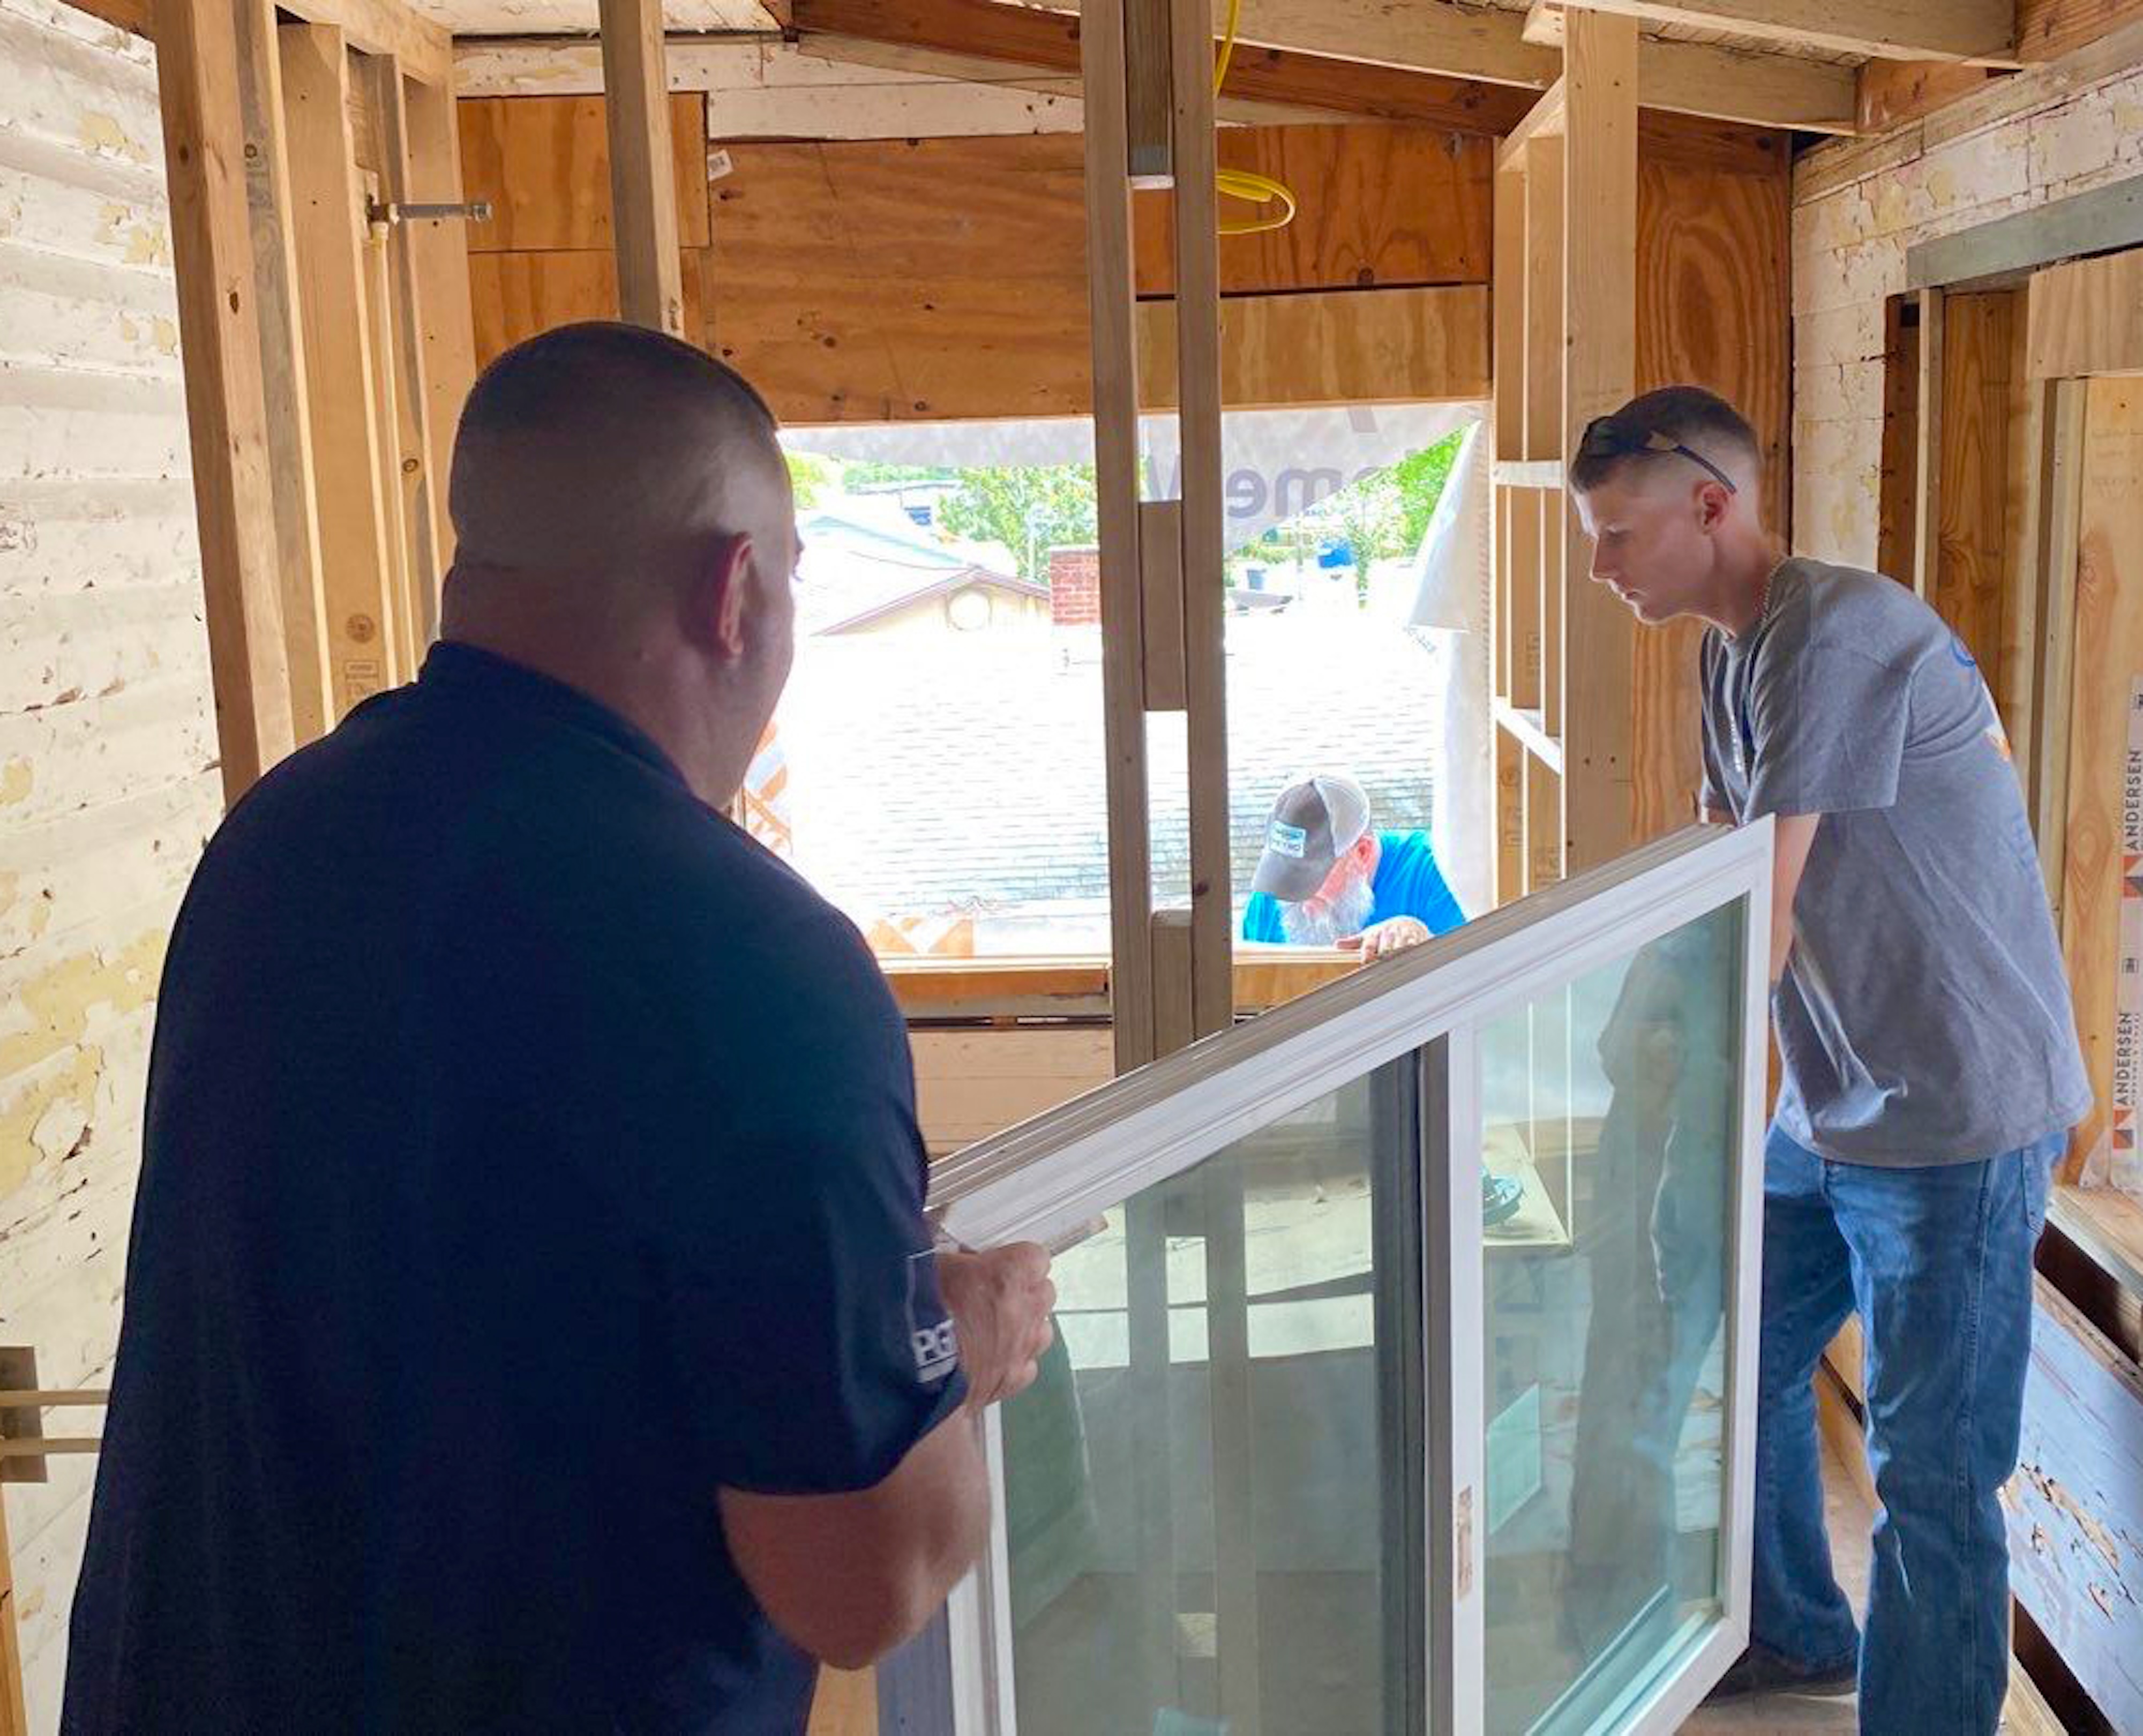 A window being prepared for install by NewSouth Window Solutions' installer team during the NOMORE Foundation donation